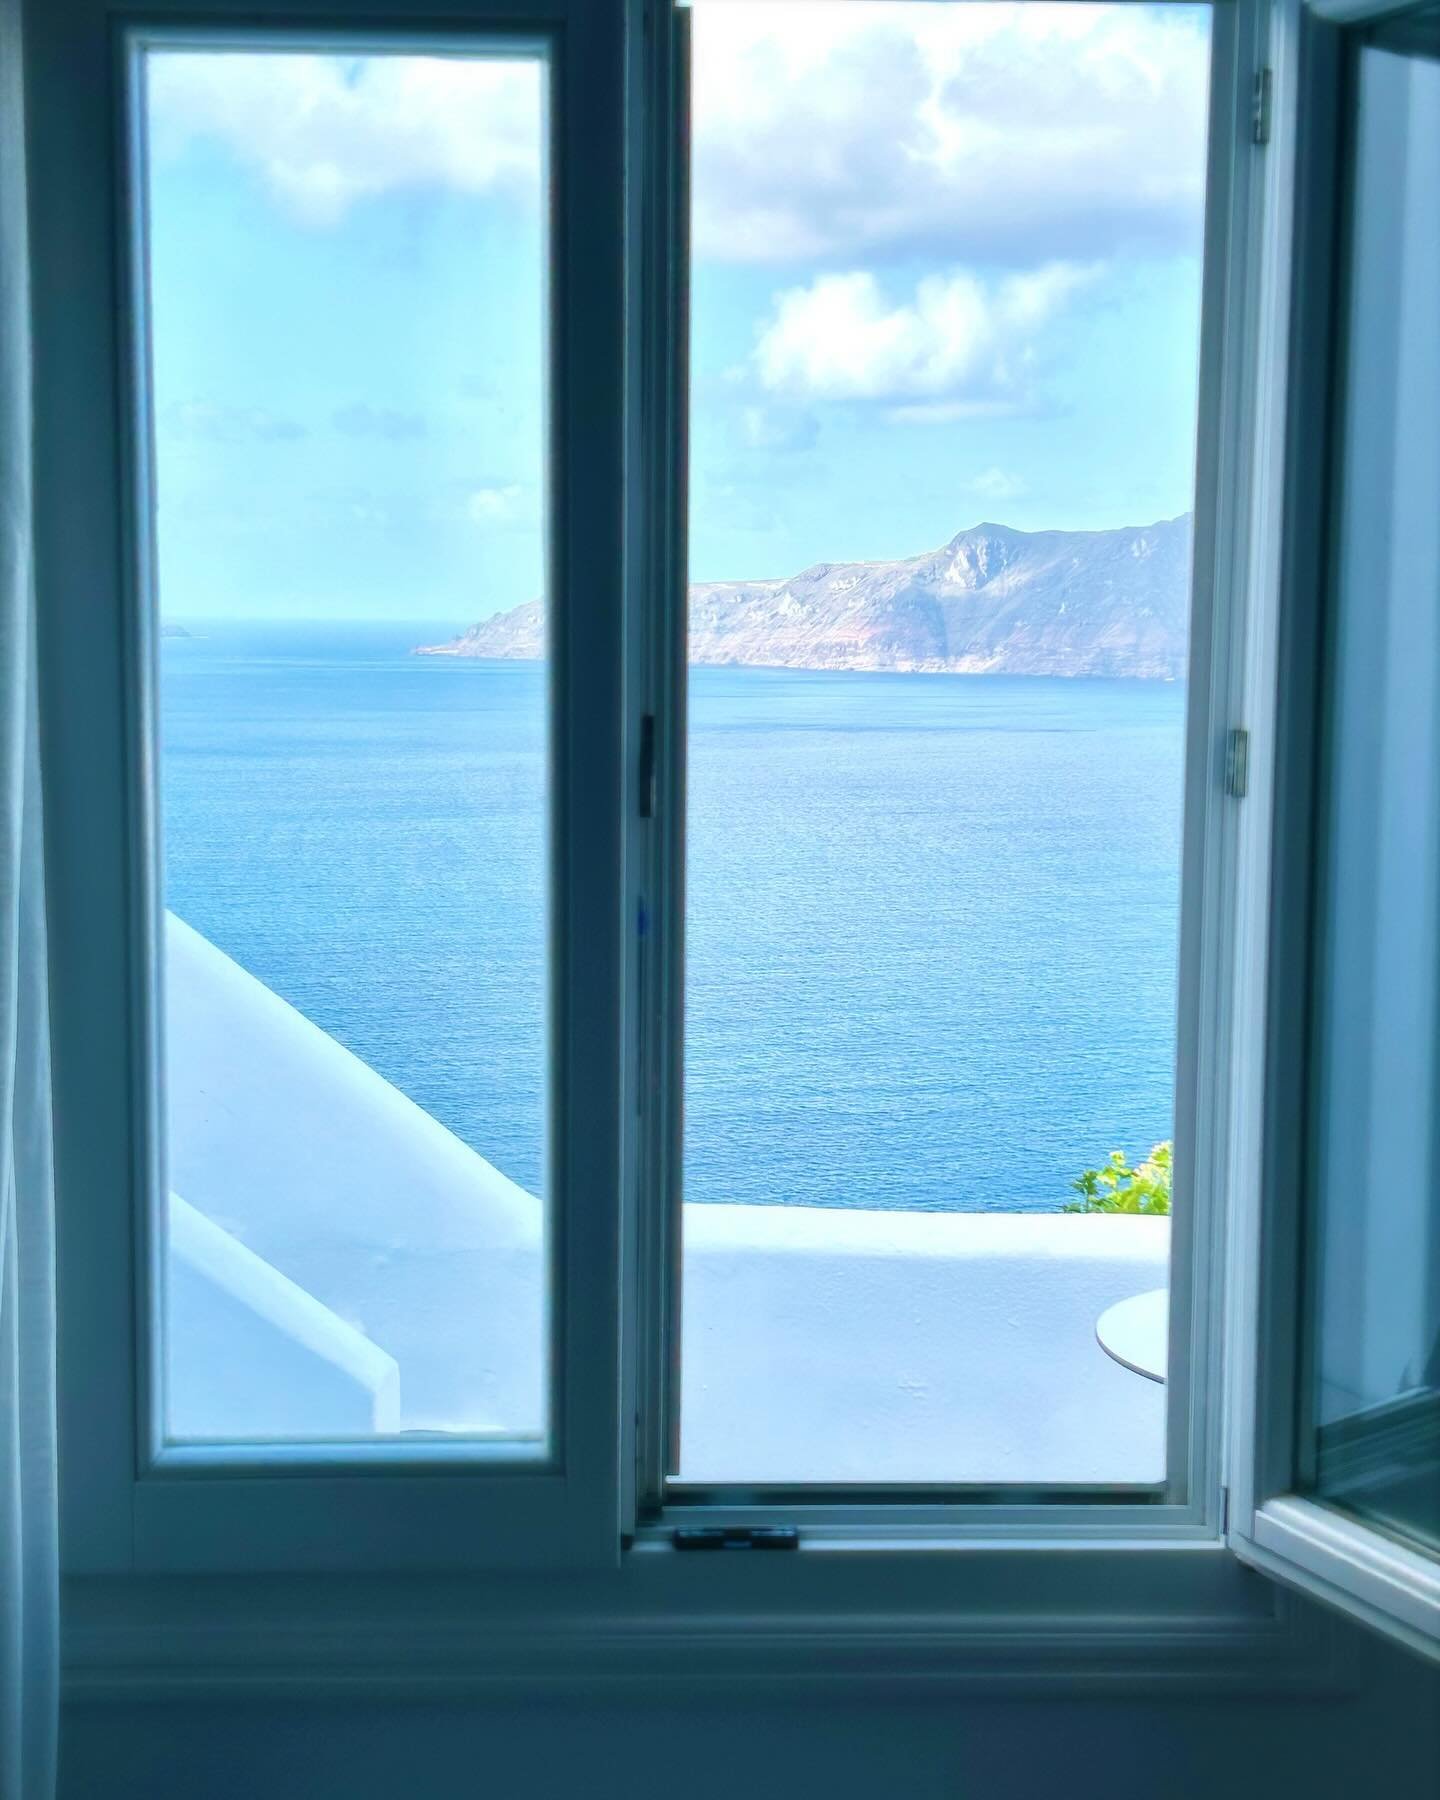 We love that &ldquo;this is our view!!!&rdquo; text 🩵&hellip; only possible by working alongside our amazing partners, like @kirinisantorini and @leadinghotelsoftheworld! 
-
-
#katikies #katikieskirini #leadinghotelsoftheworld #traveladvisor #duende